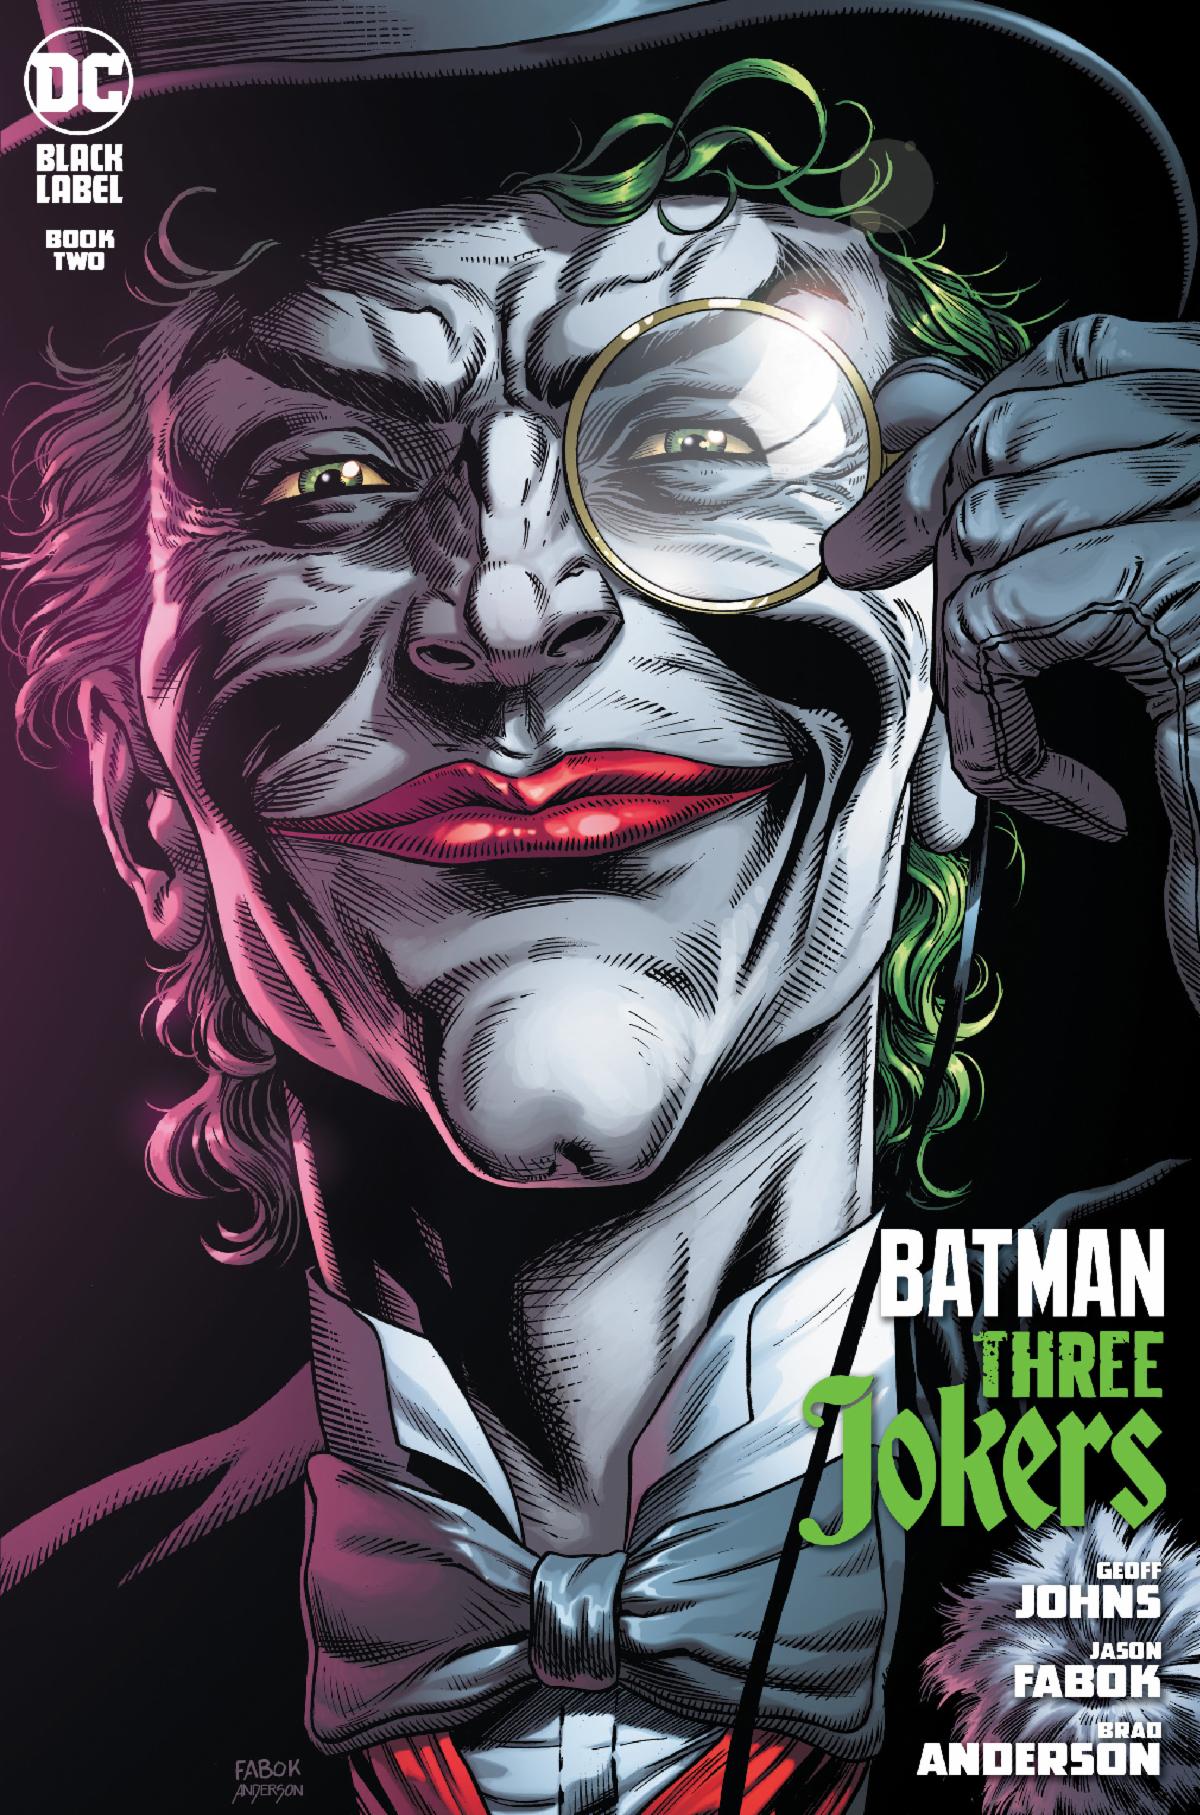 Batman Three Jokers #2 Joker Death in the Family Top Hat & Monocle Premium  Variant Cover E - Legacy Comics and Cards | Trading Card Games, Comic  Books, and More!